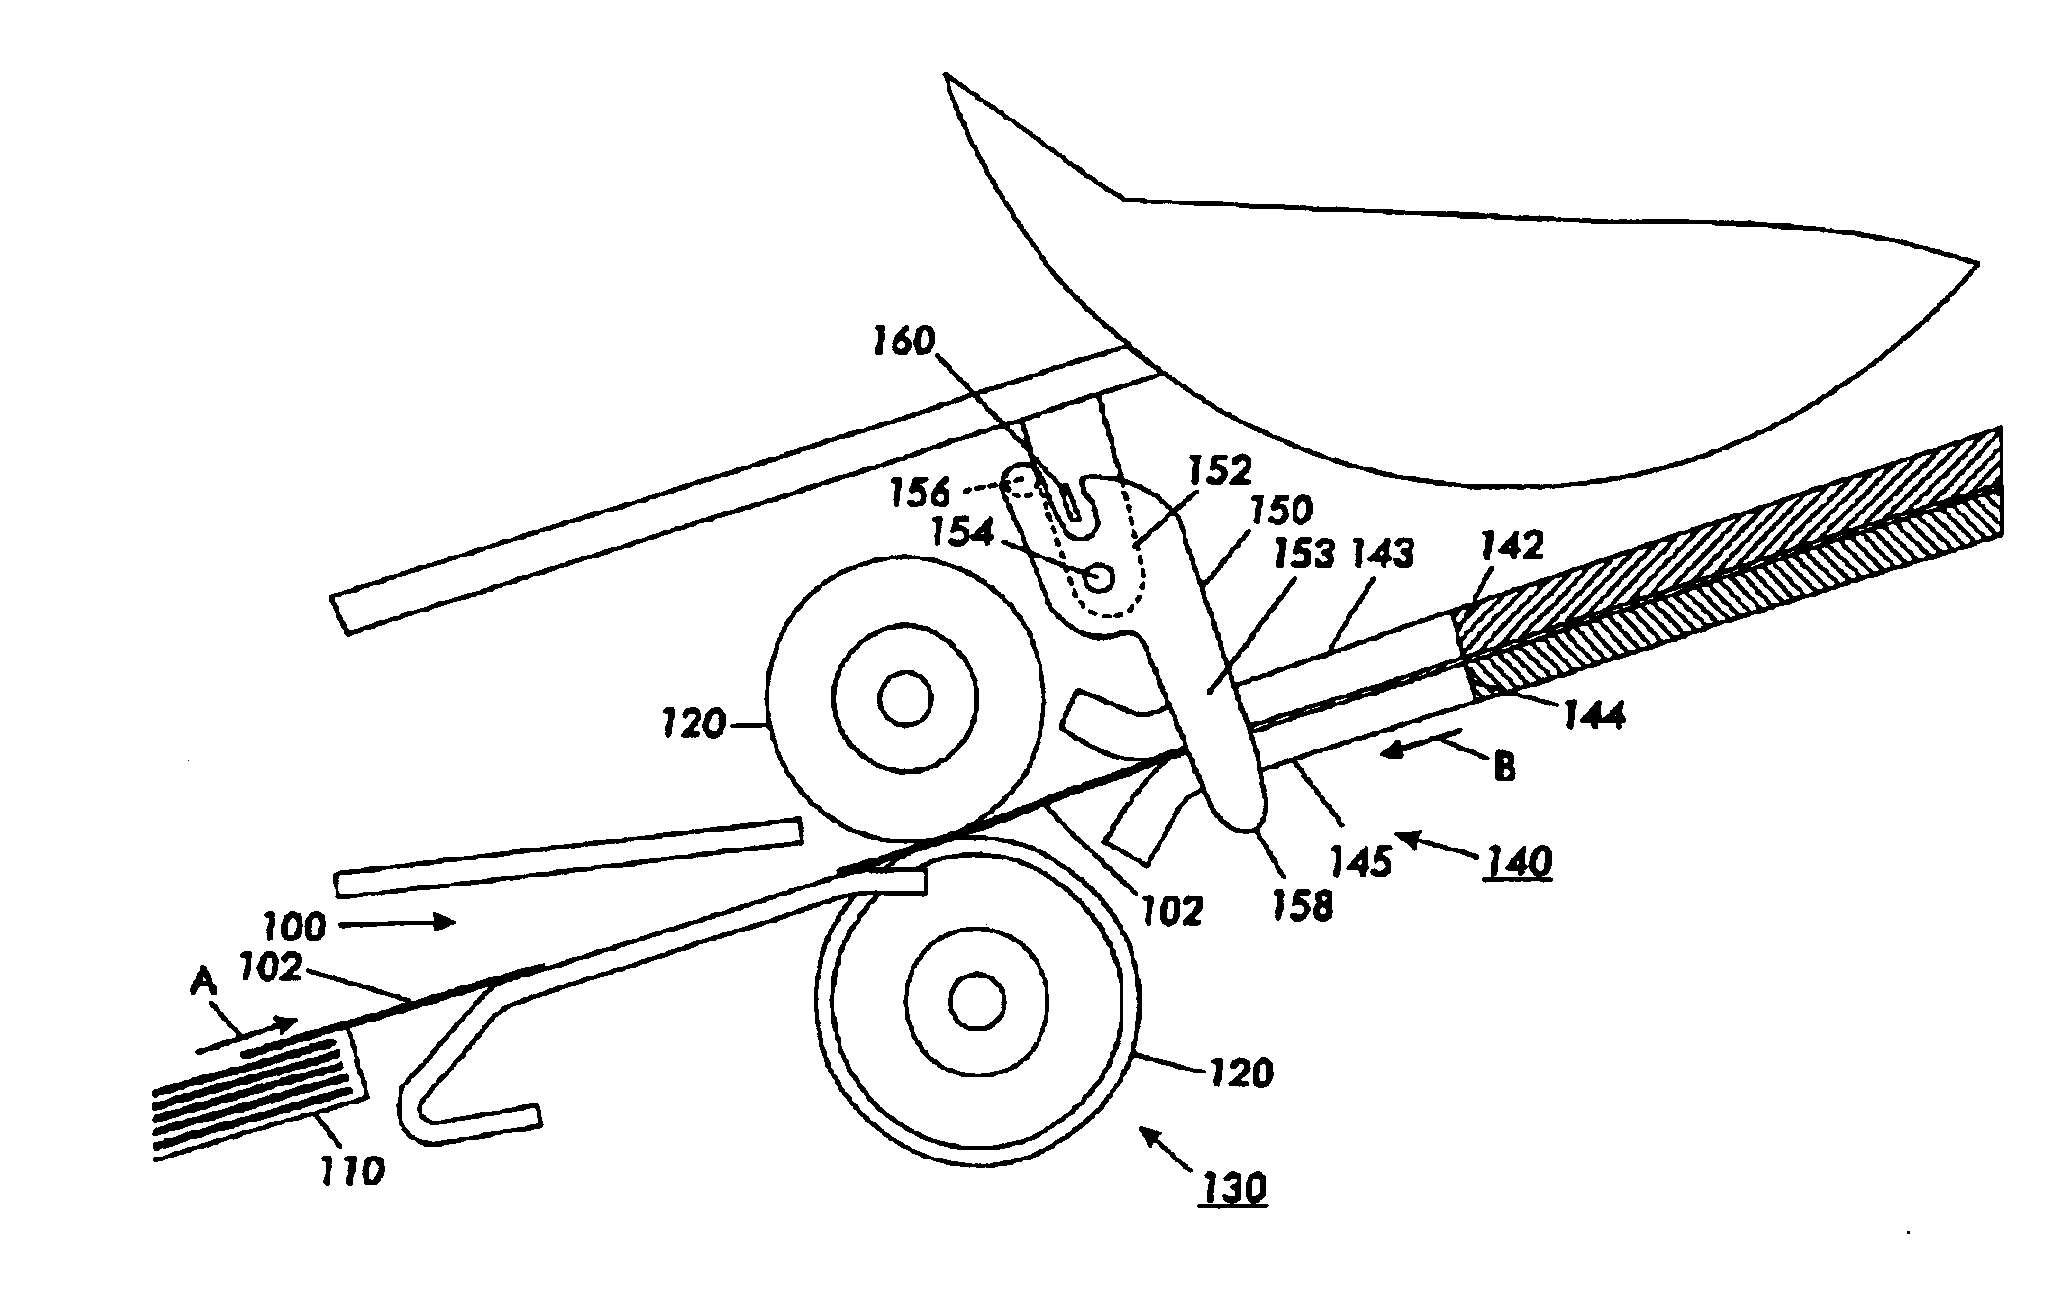 Systems and methods providing bi-directional passage of an object via an articulated member